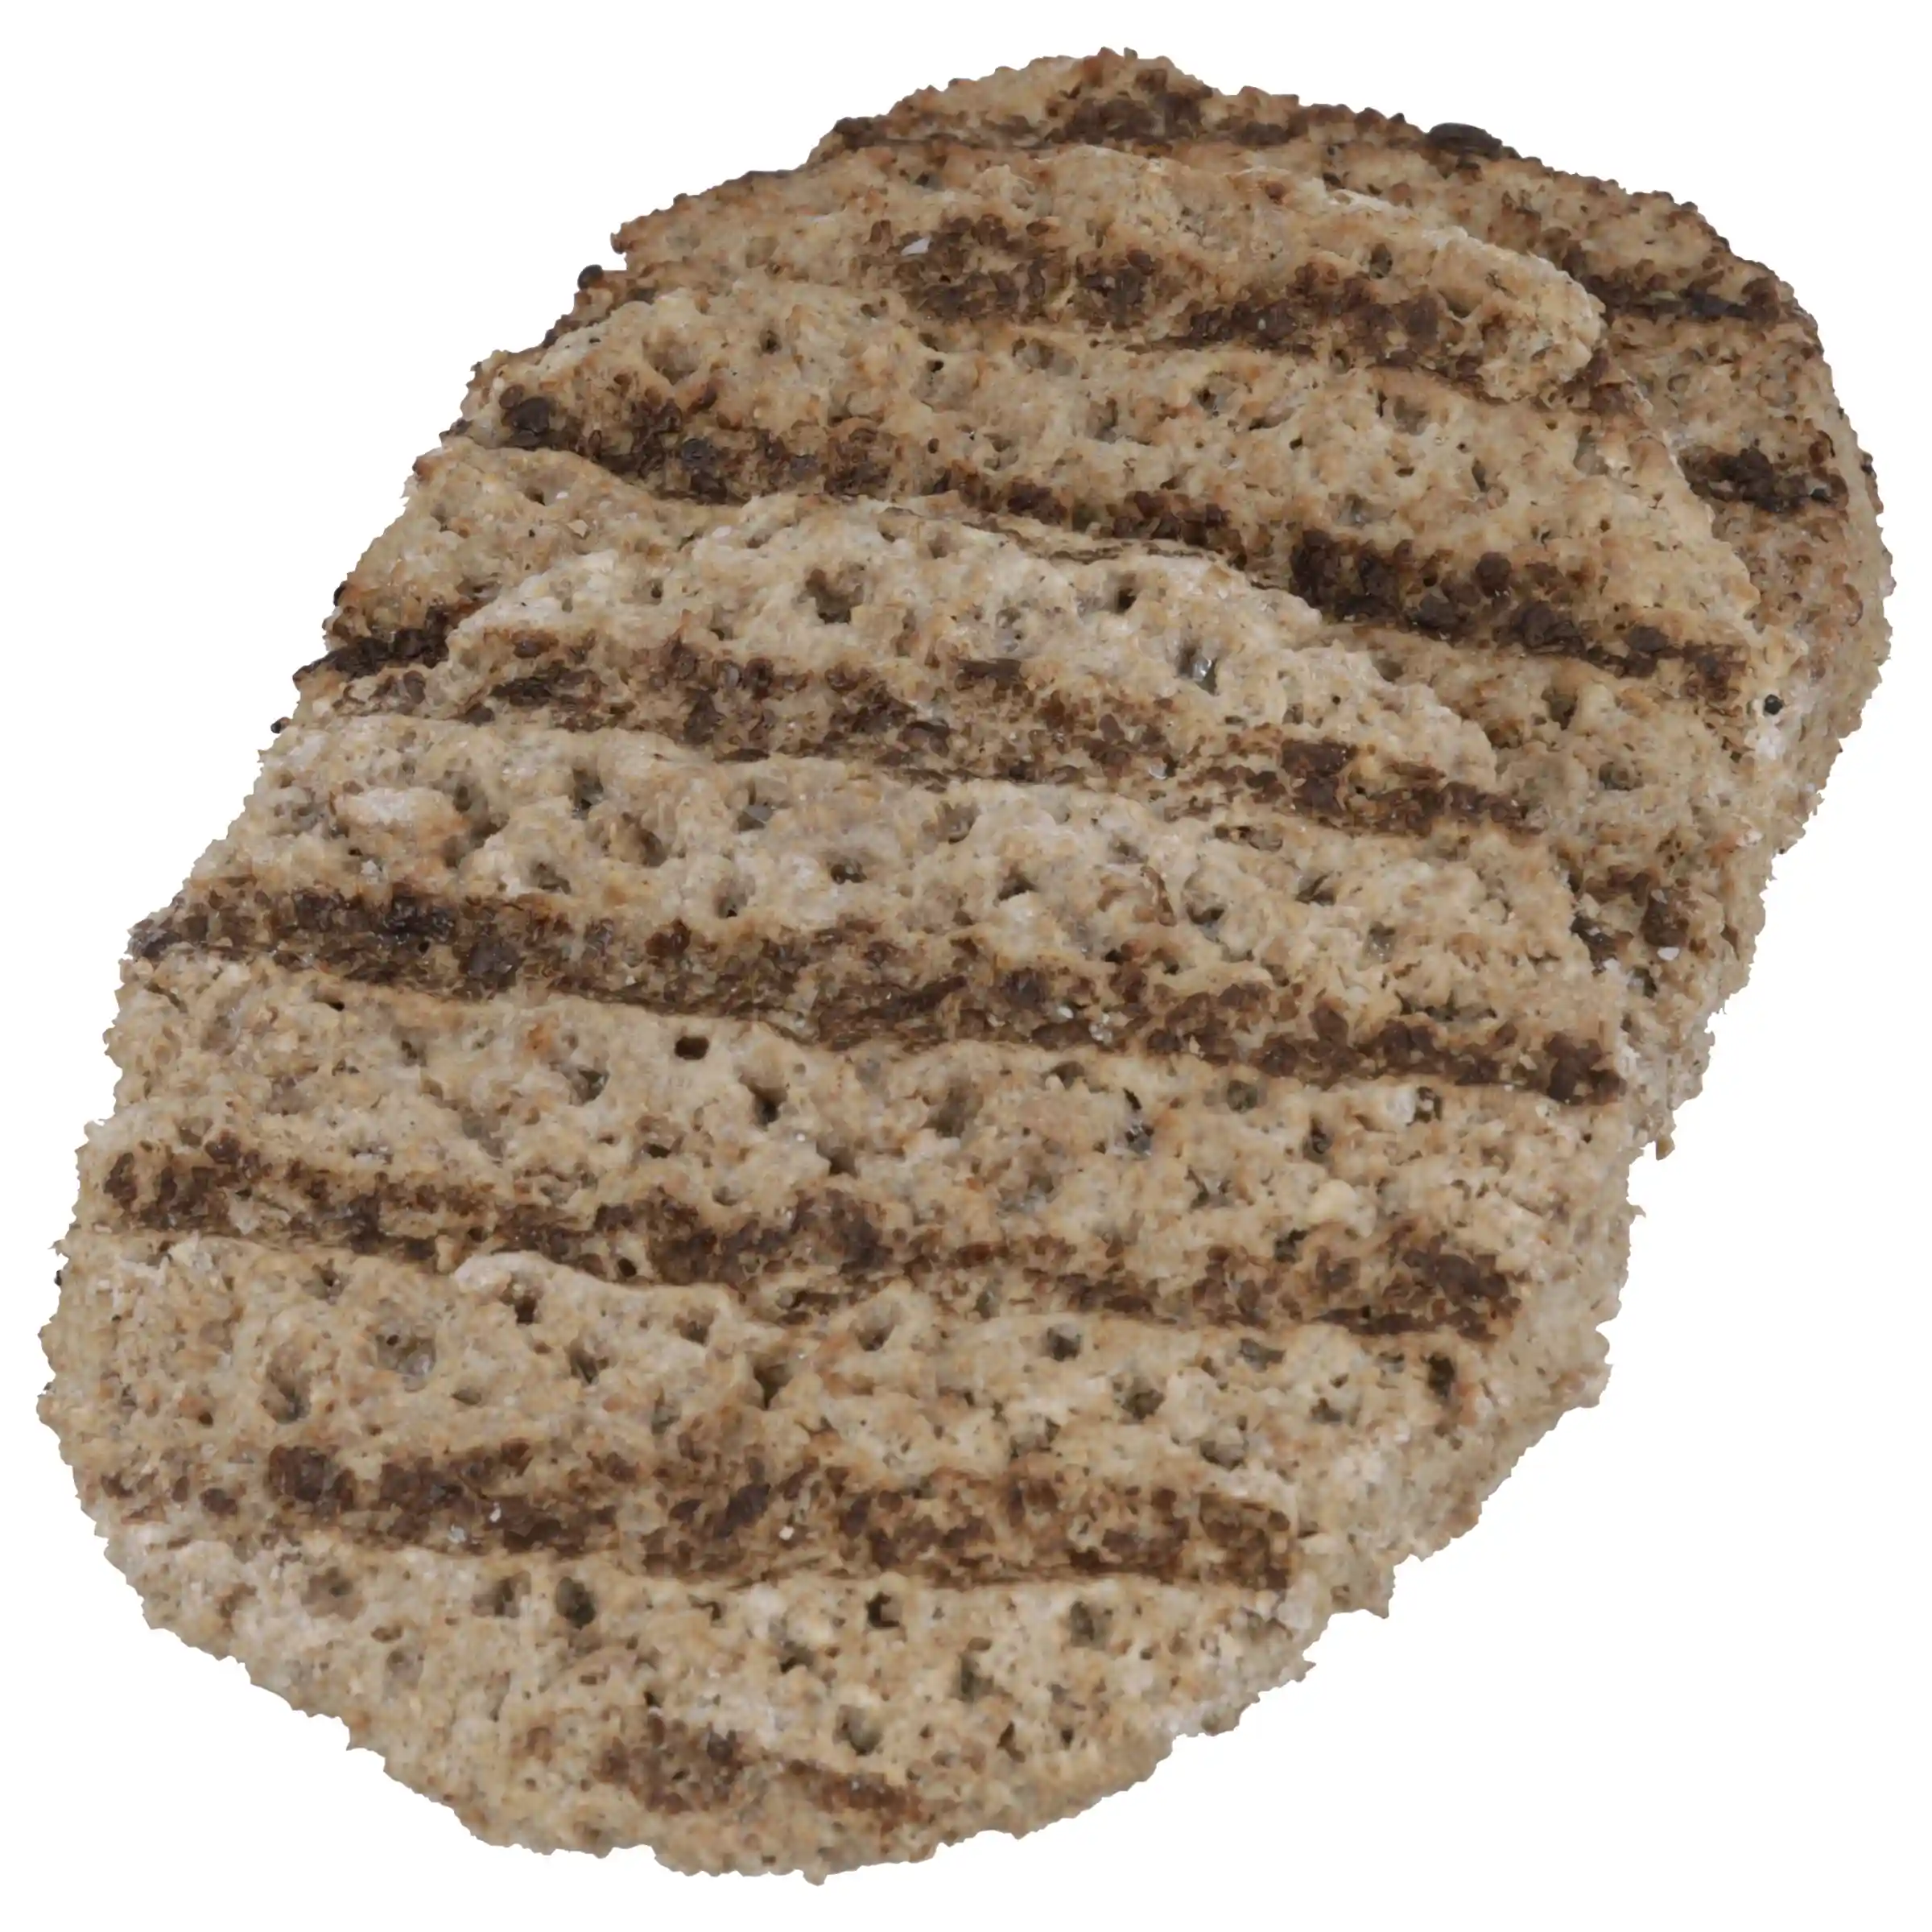 Tenderbroil® Fully Cooked Flame Grilled Beef Pattie, 4 oz, 64 Pieces per case, 16 Lbs      _image_11